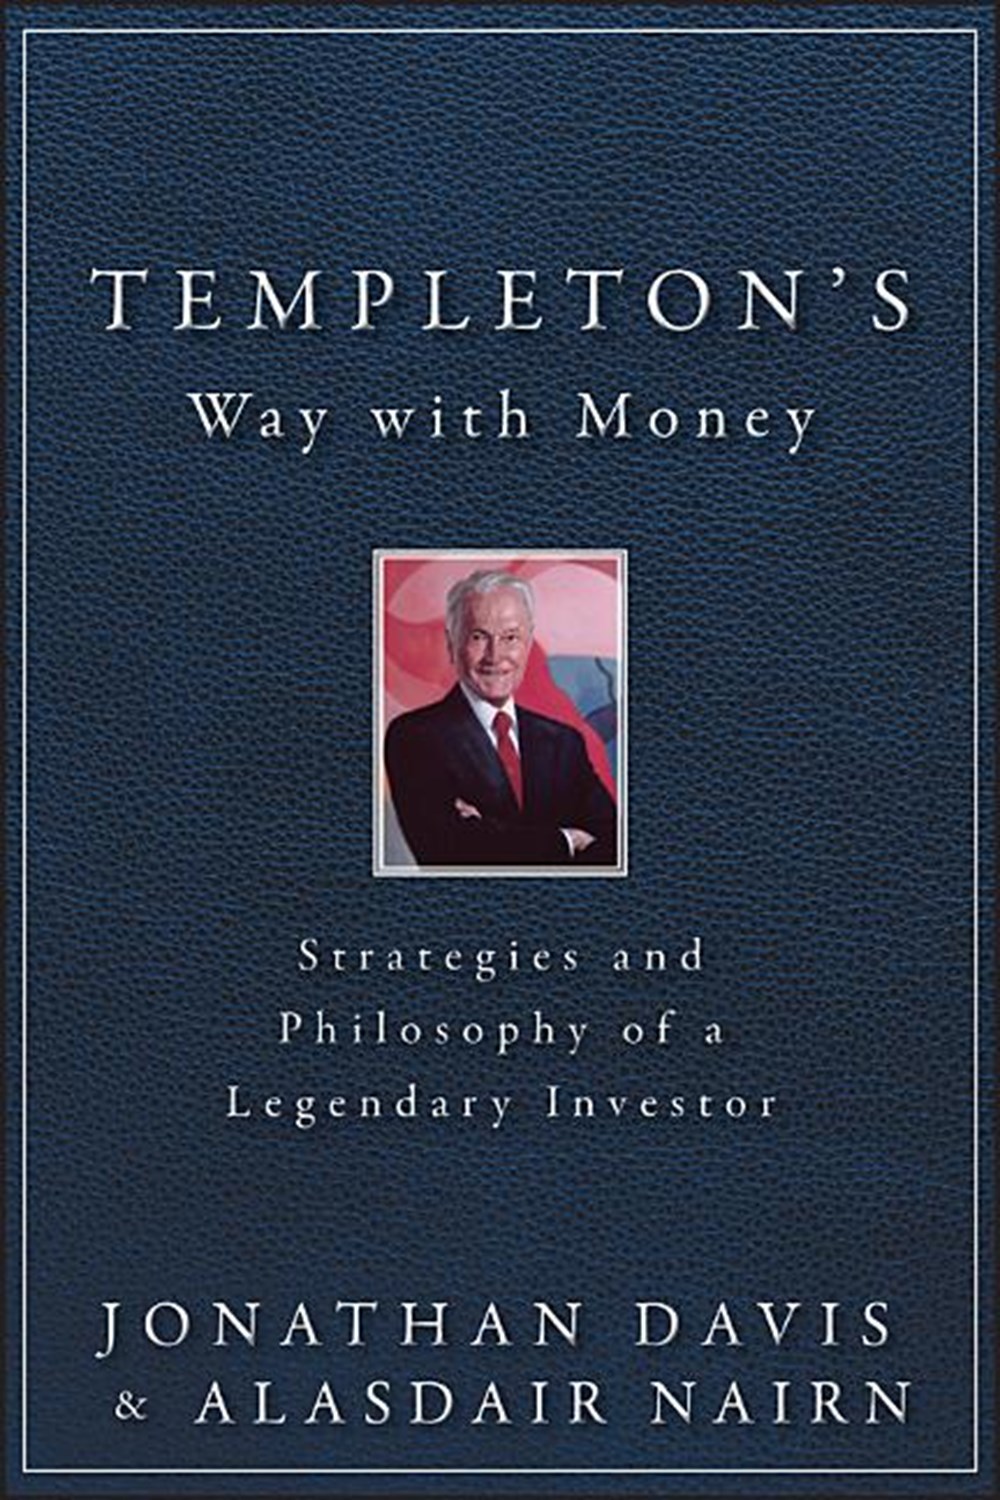 Templeton's Way with Money Strategies and Philosophy of a Legendary Investor